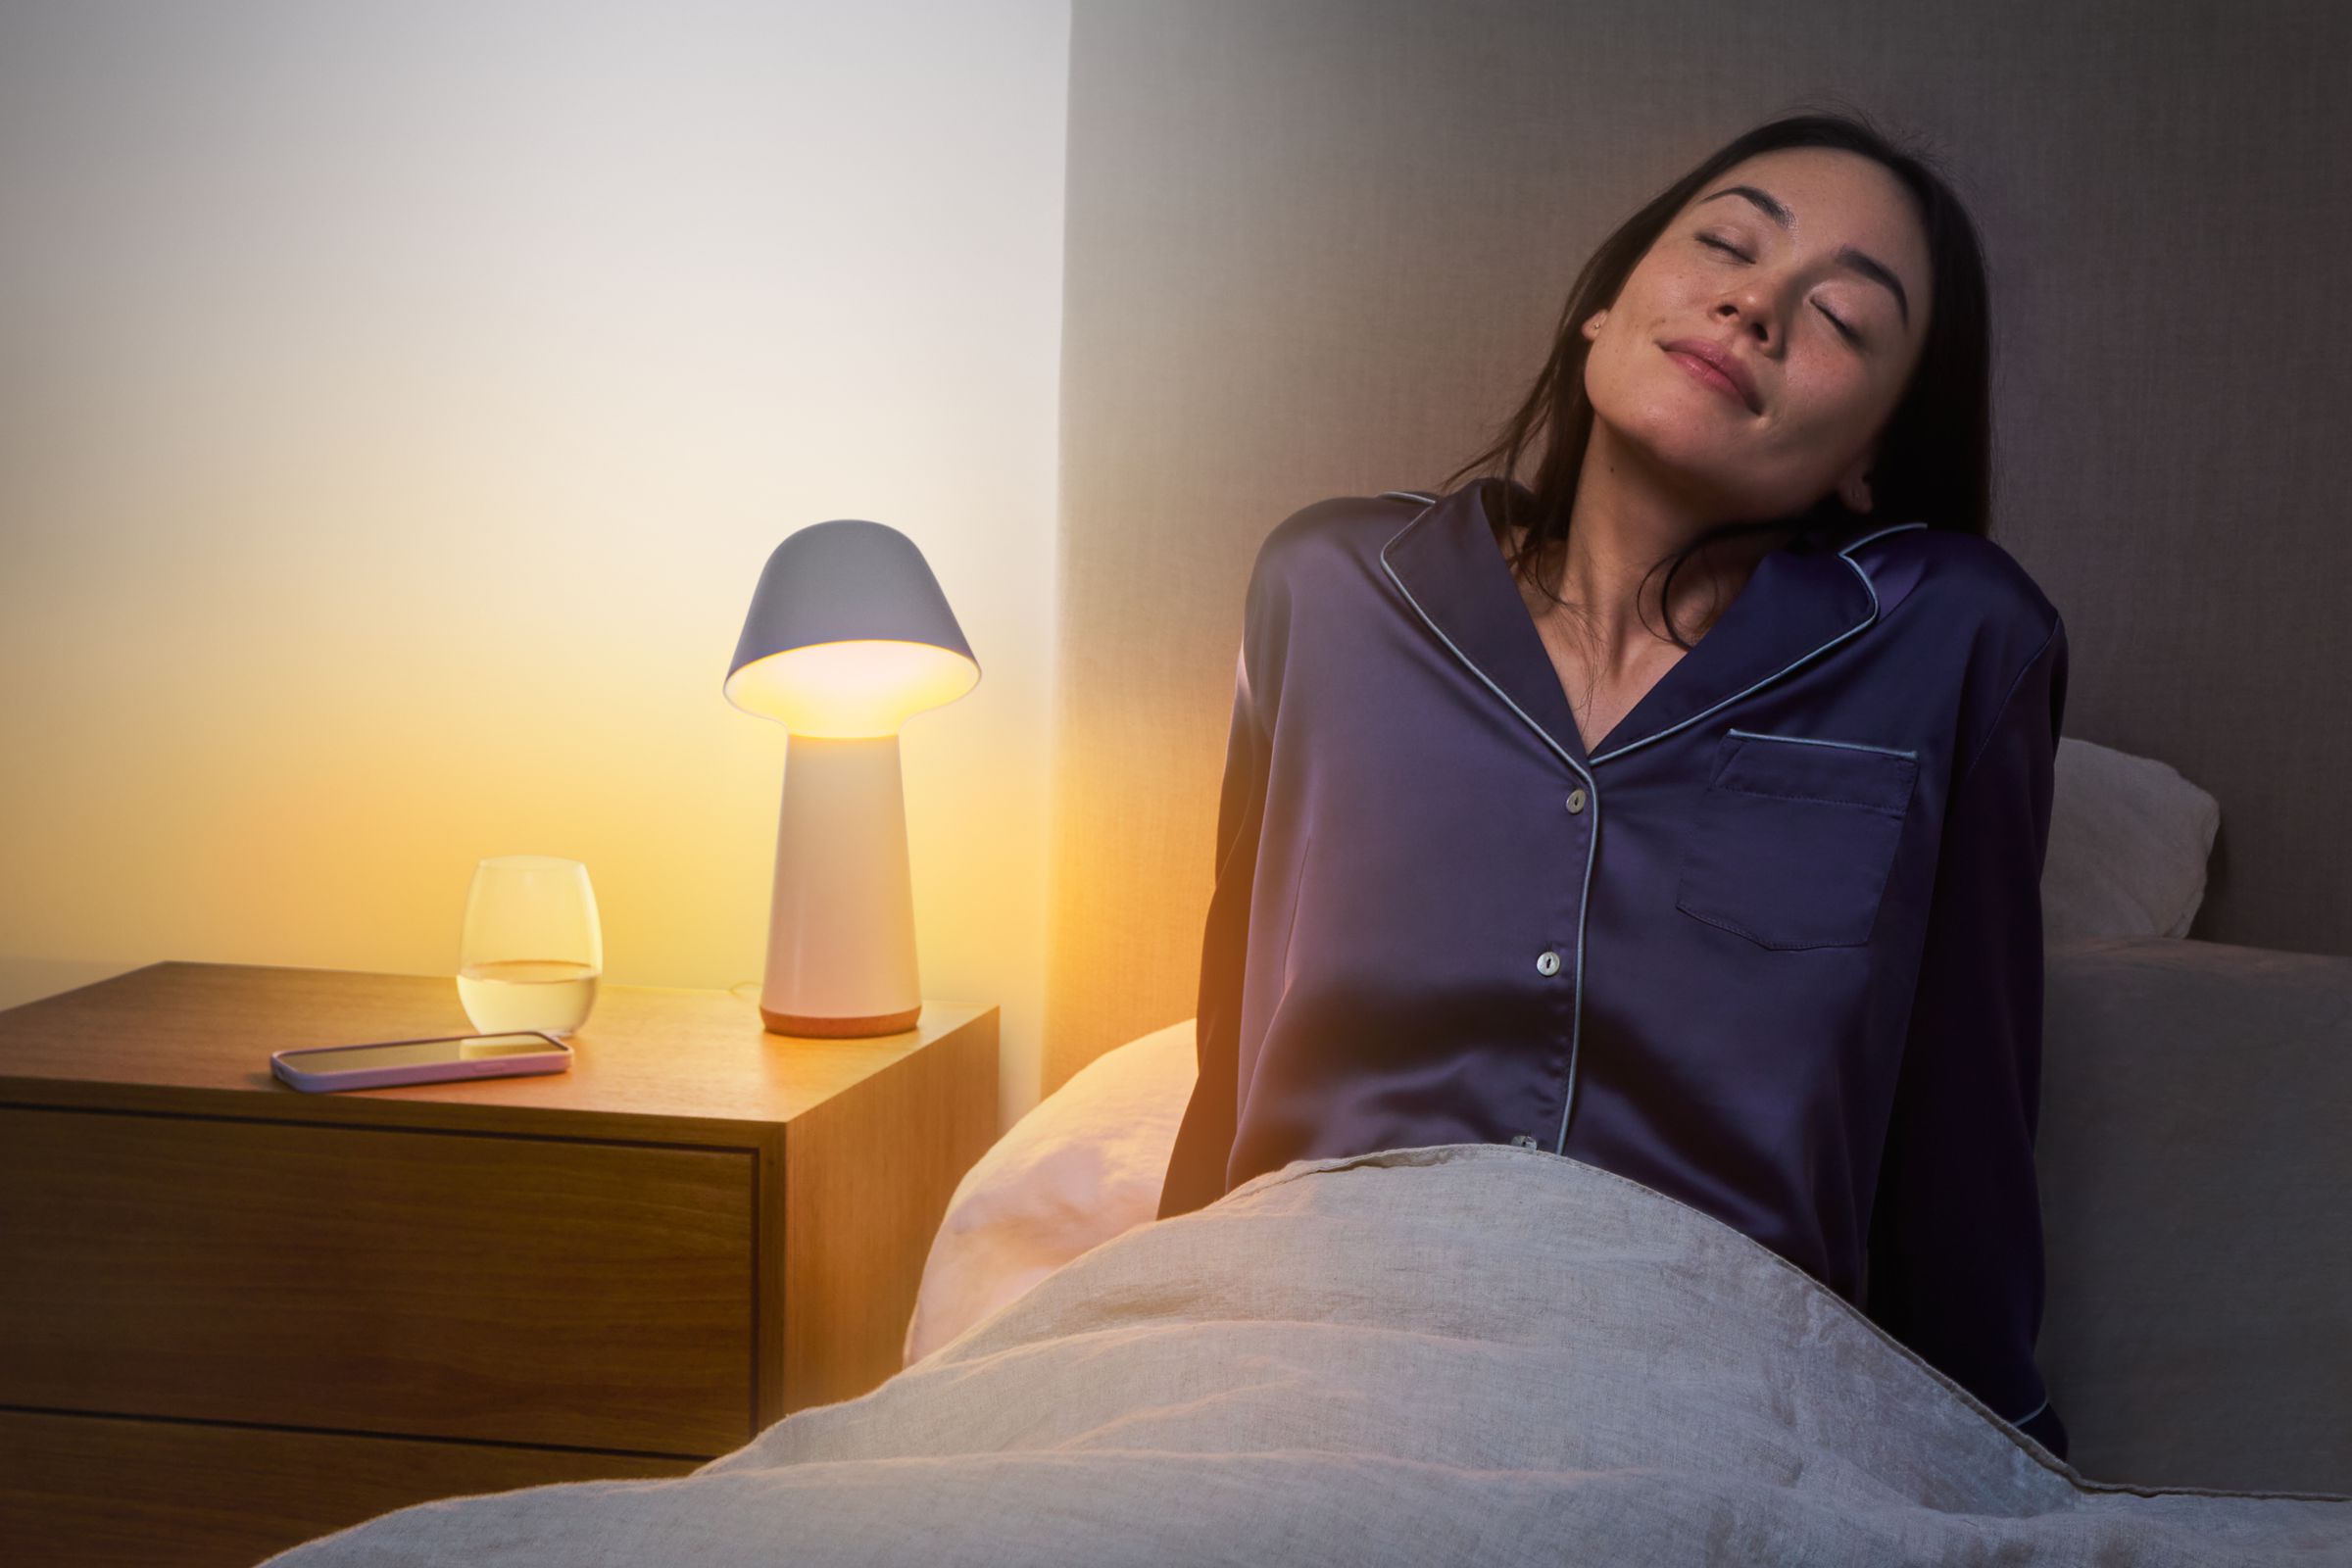 Hue’s new Twilight bedside lamp costs $280.